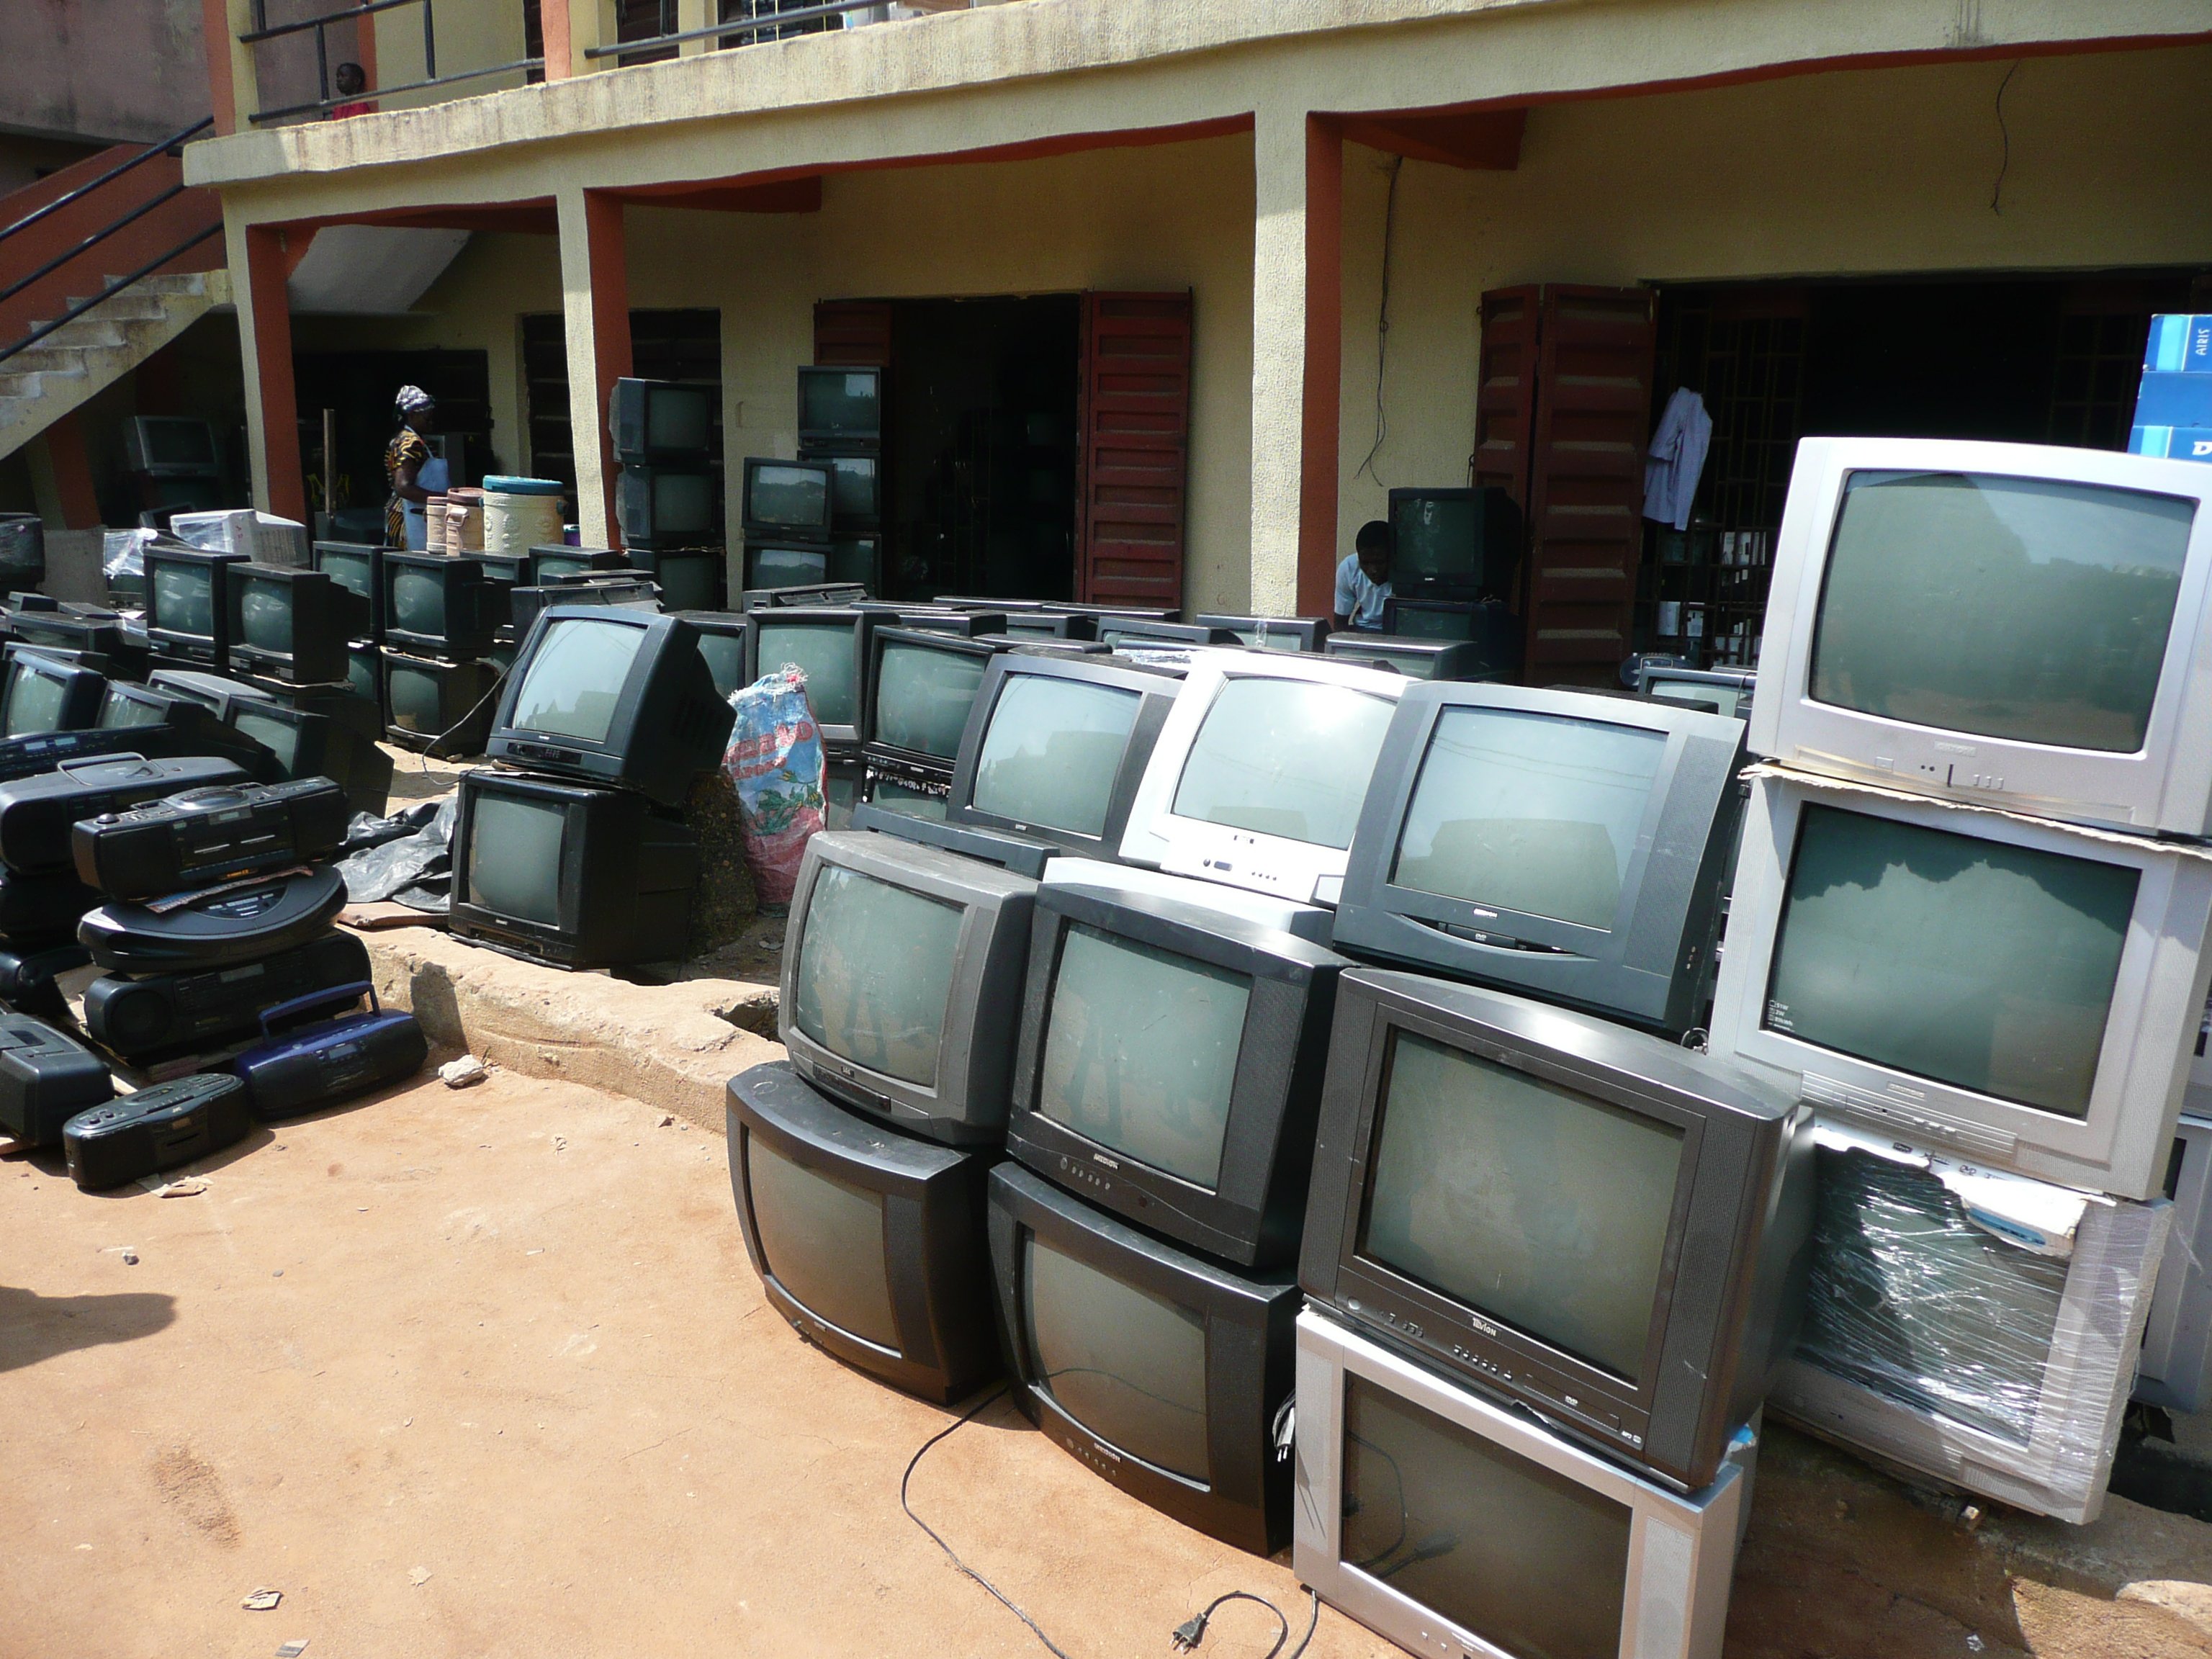 The Growing Problem of E-Waste